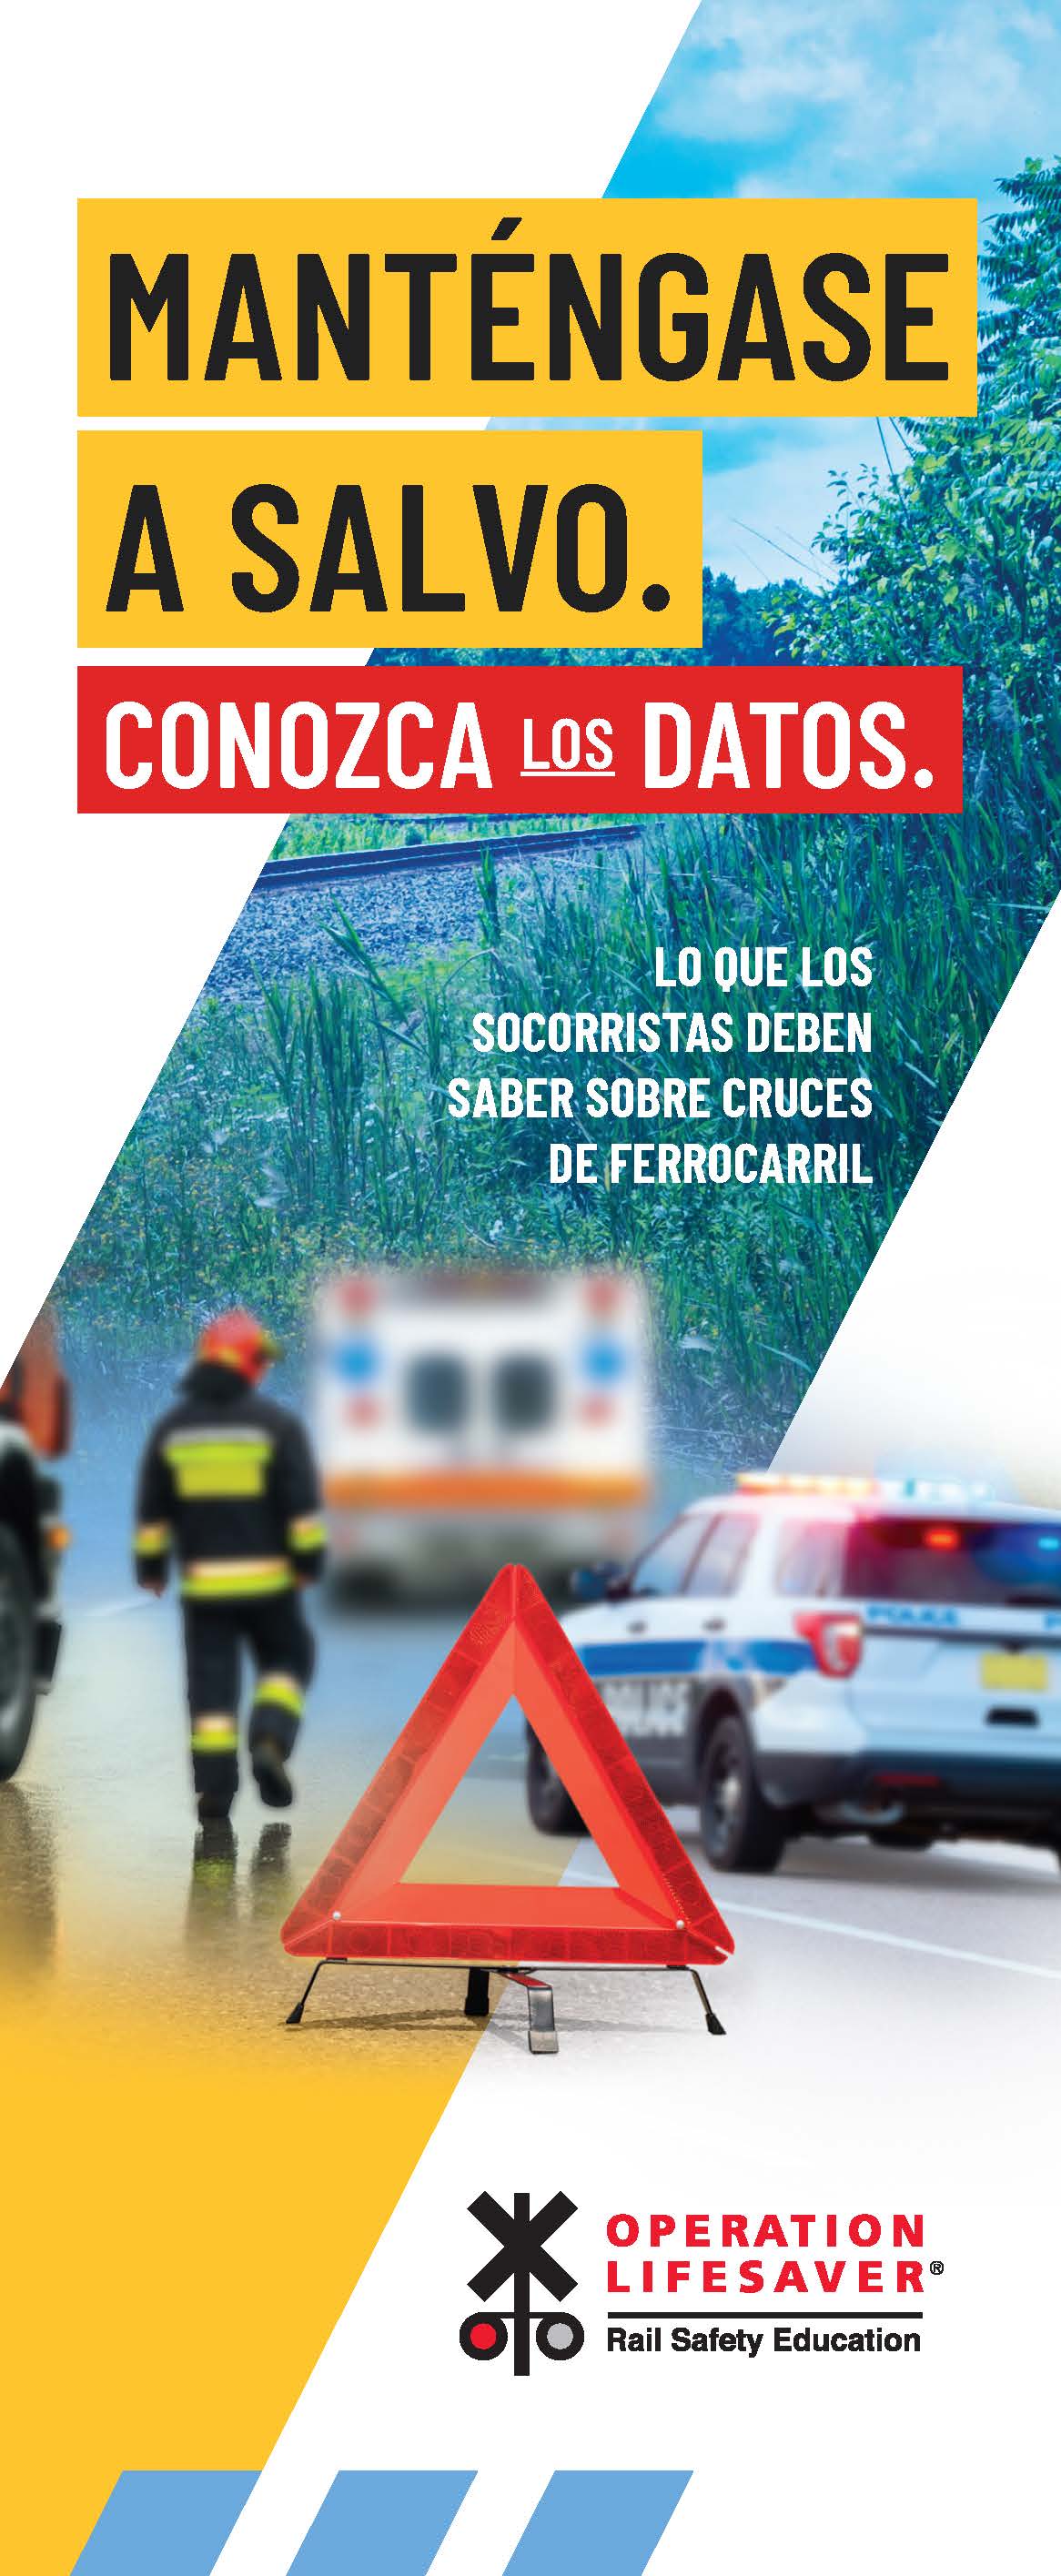 First Responders: Stay Safe. Know the Facts. Spanish